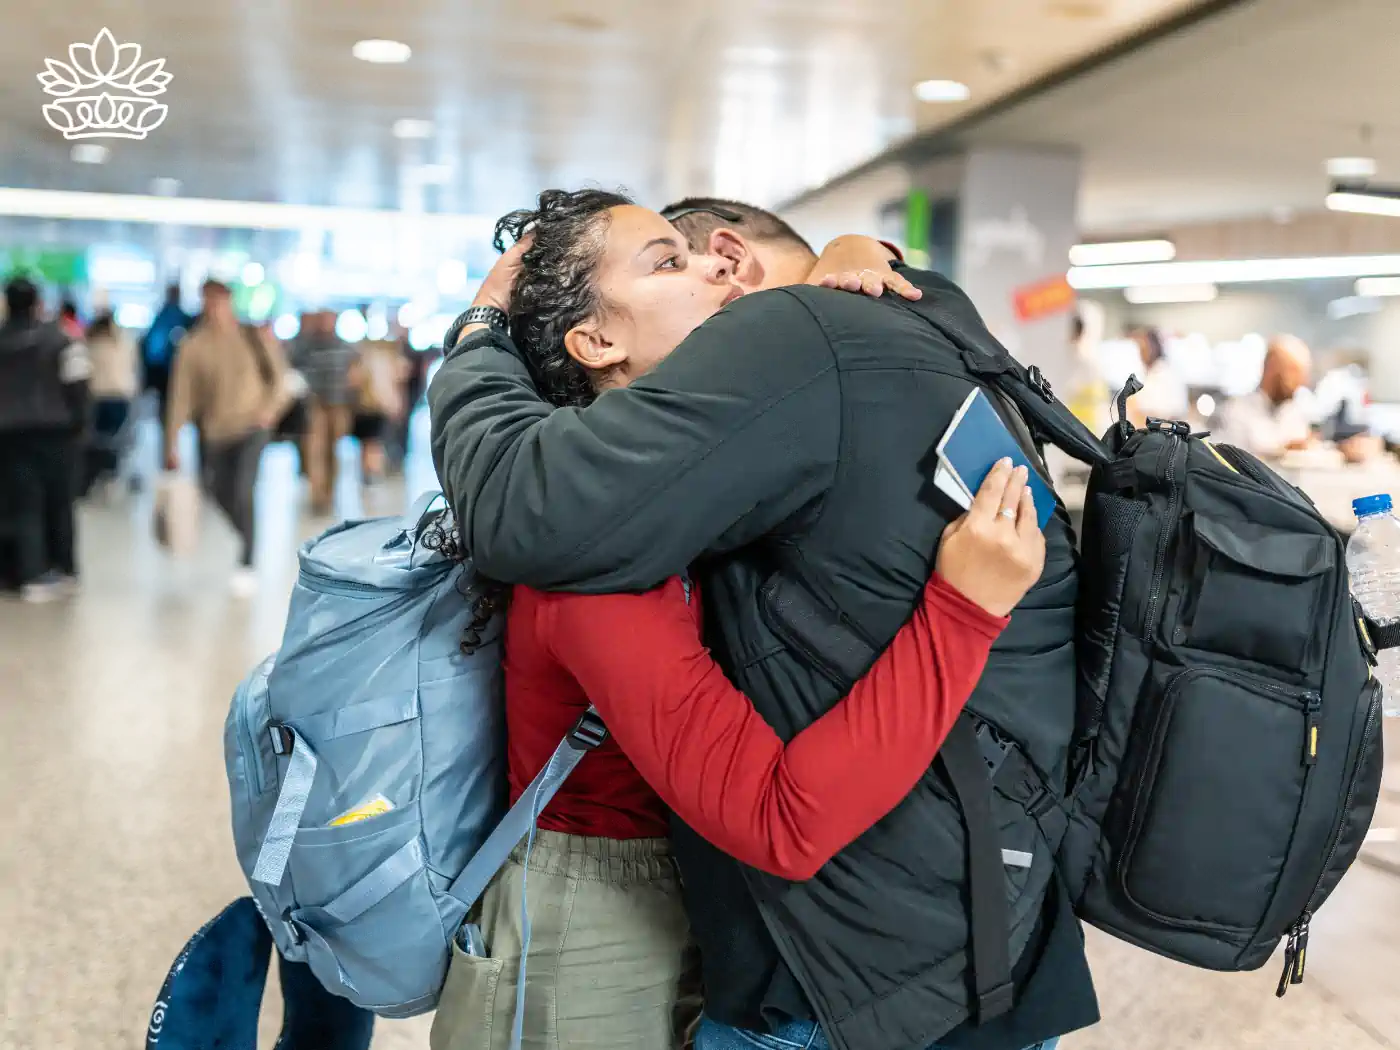 A couple embracing in an airport, expressing heartfelt joy and reunion - Fabulous Flowers and Gifts, Heartfelt Moments Collection